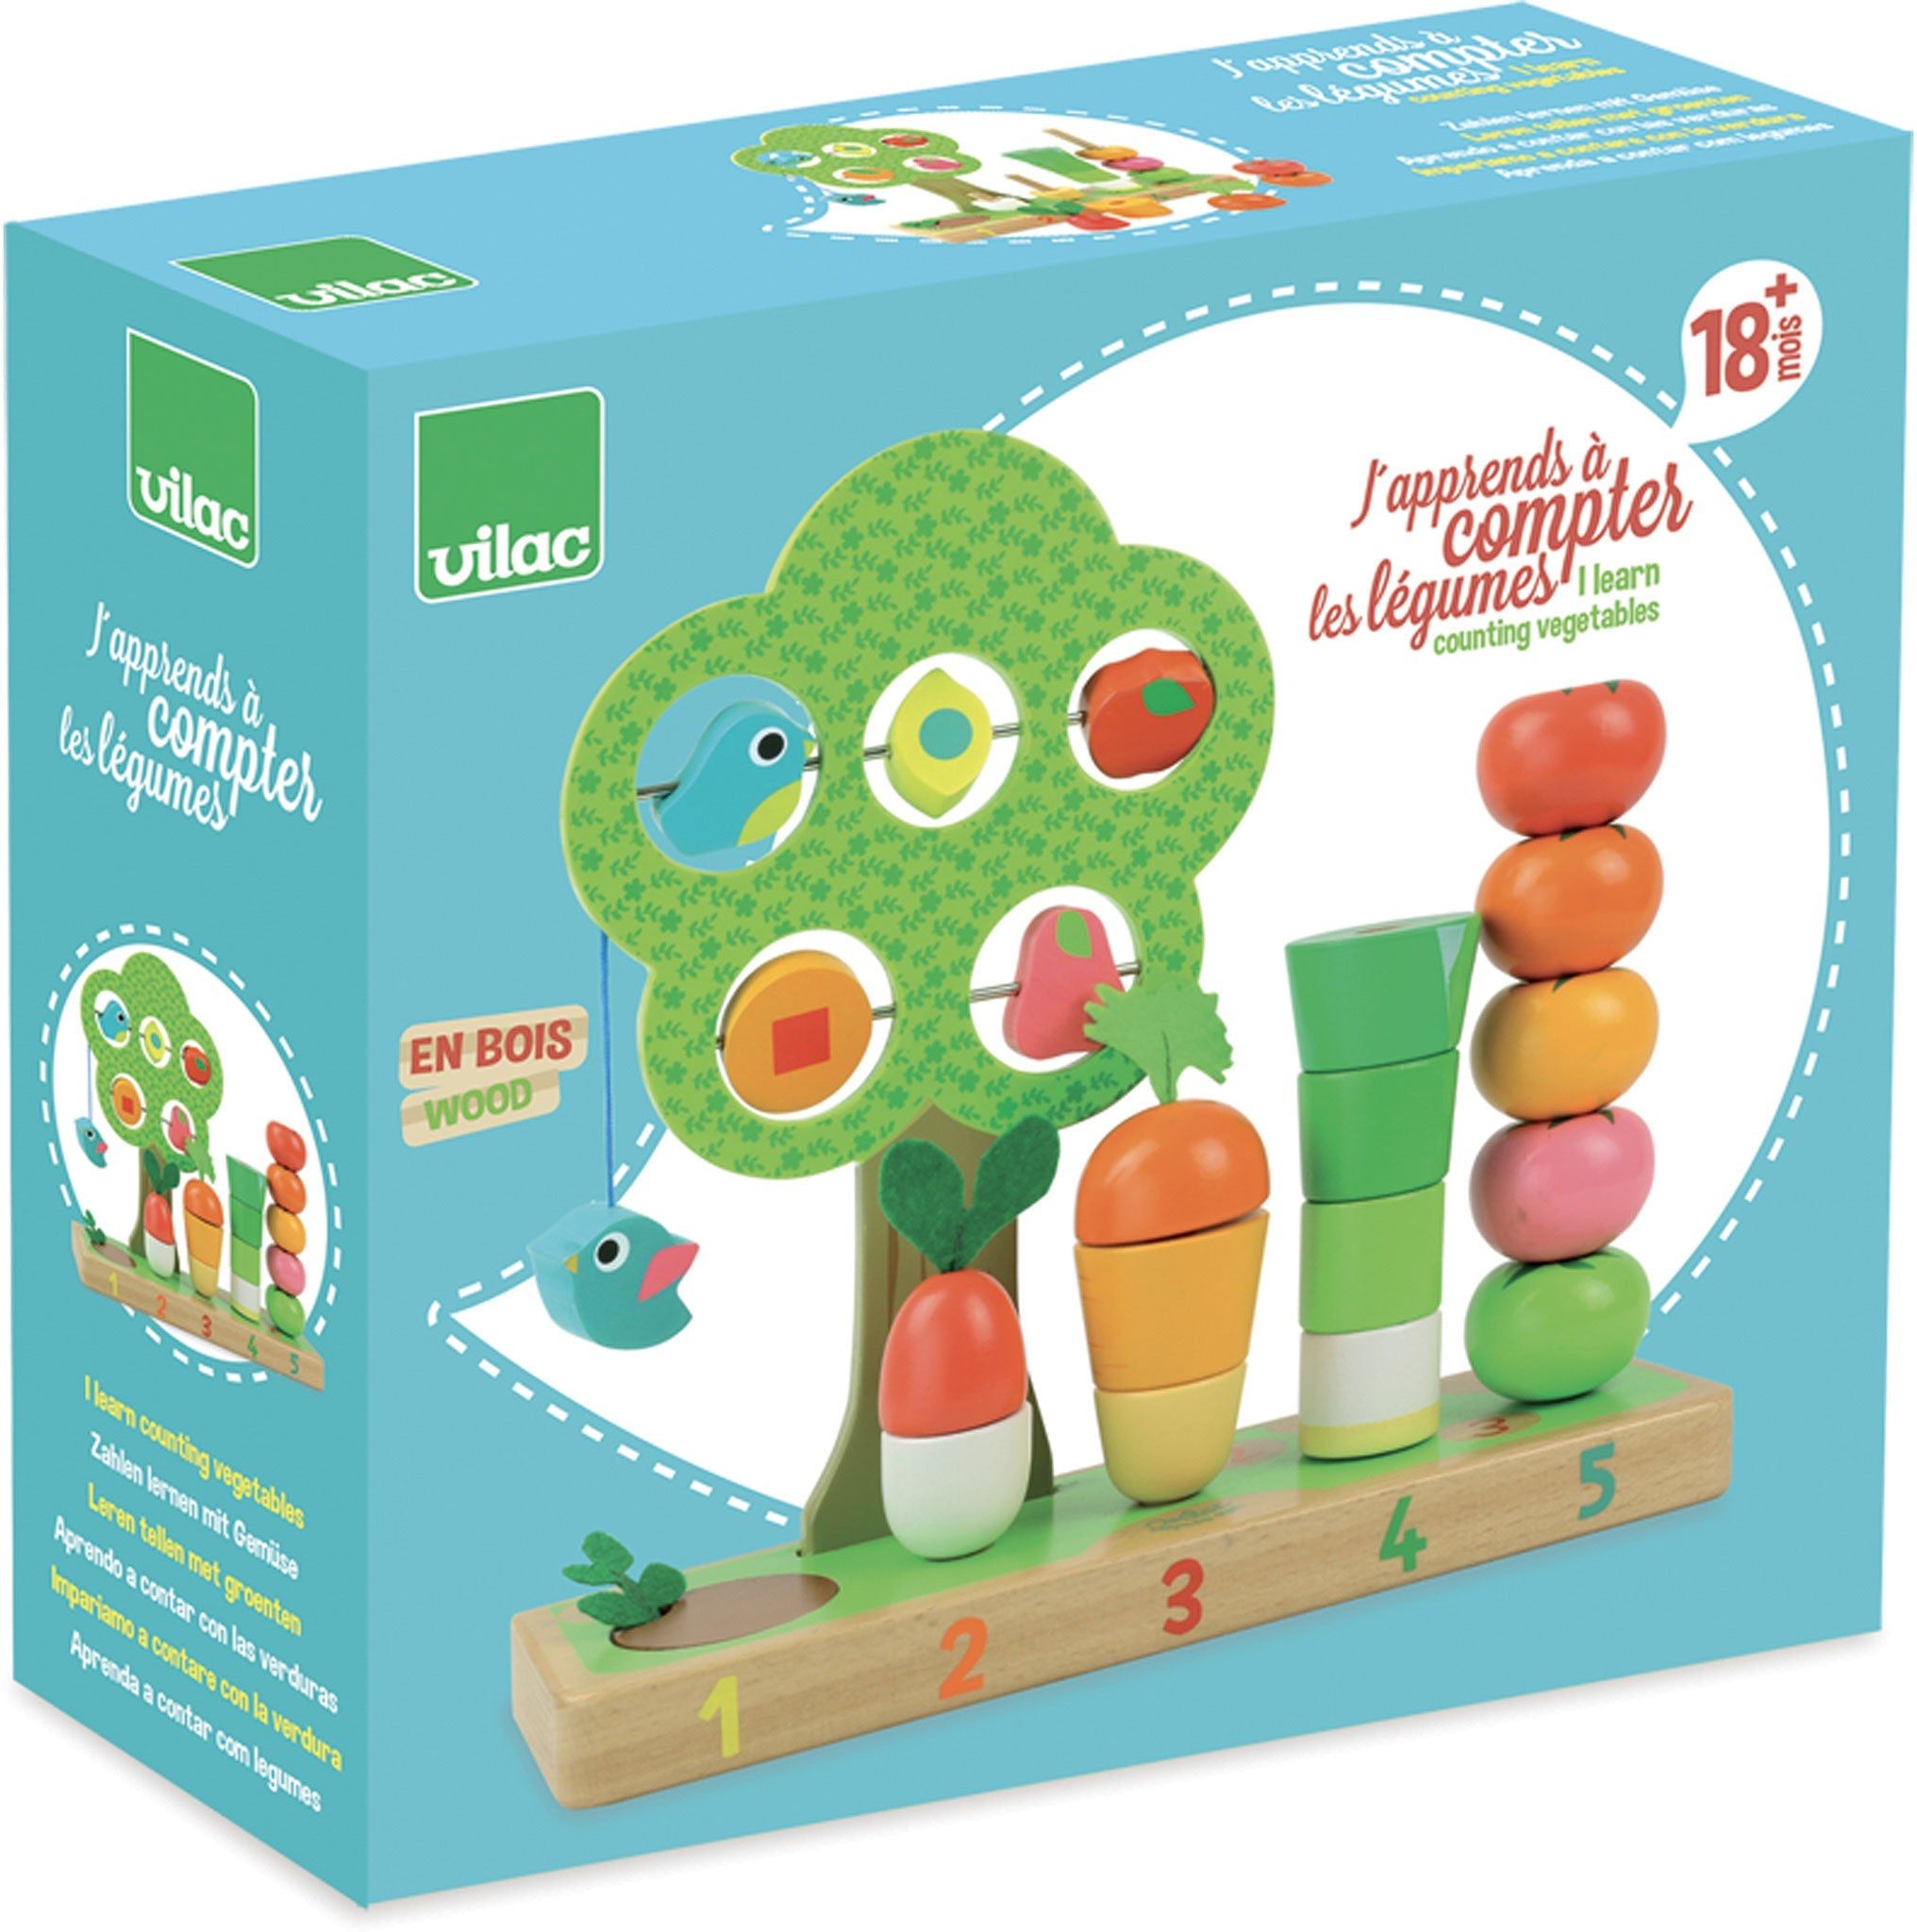 I learn counting vegetables wooden activity toy - Vilac